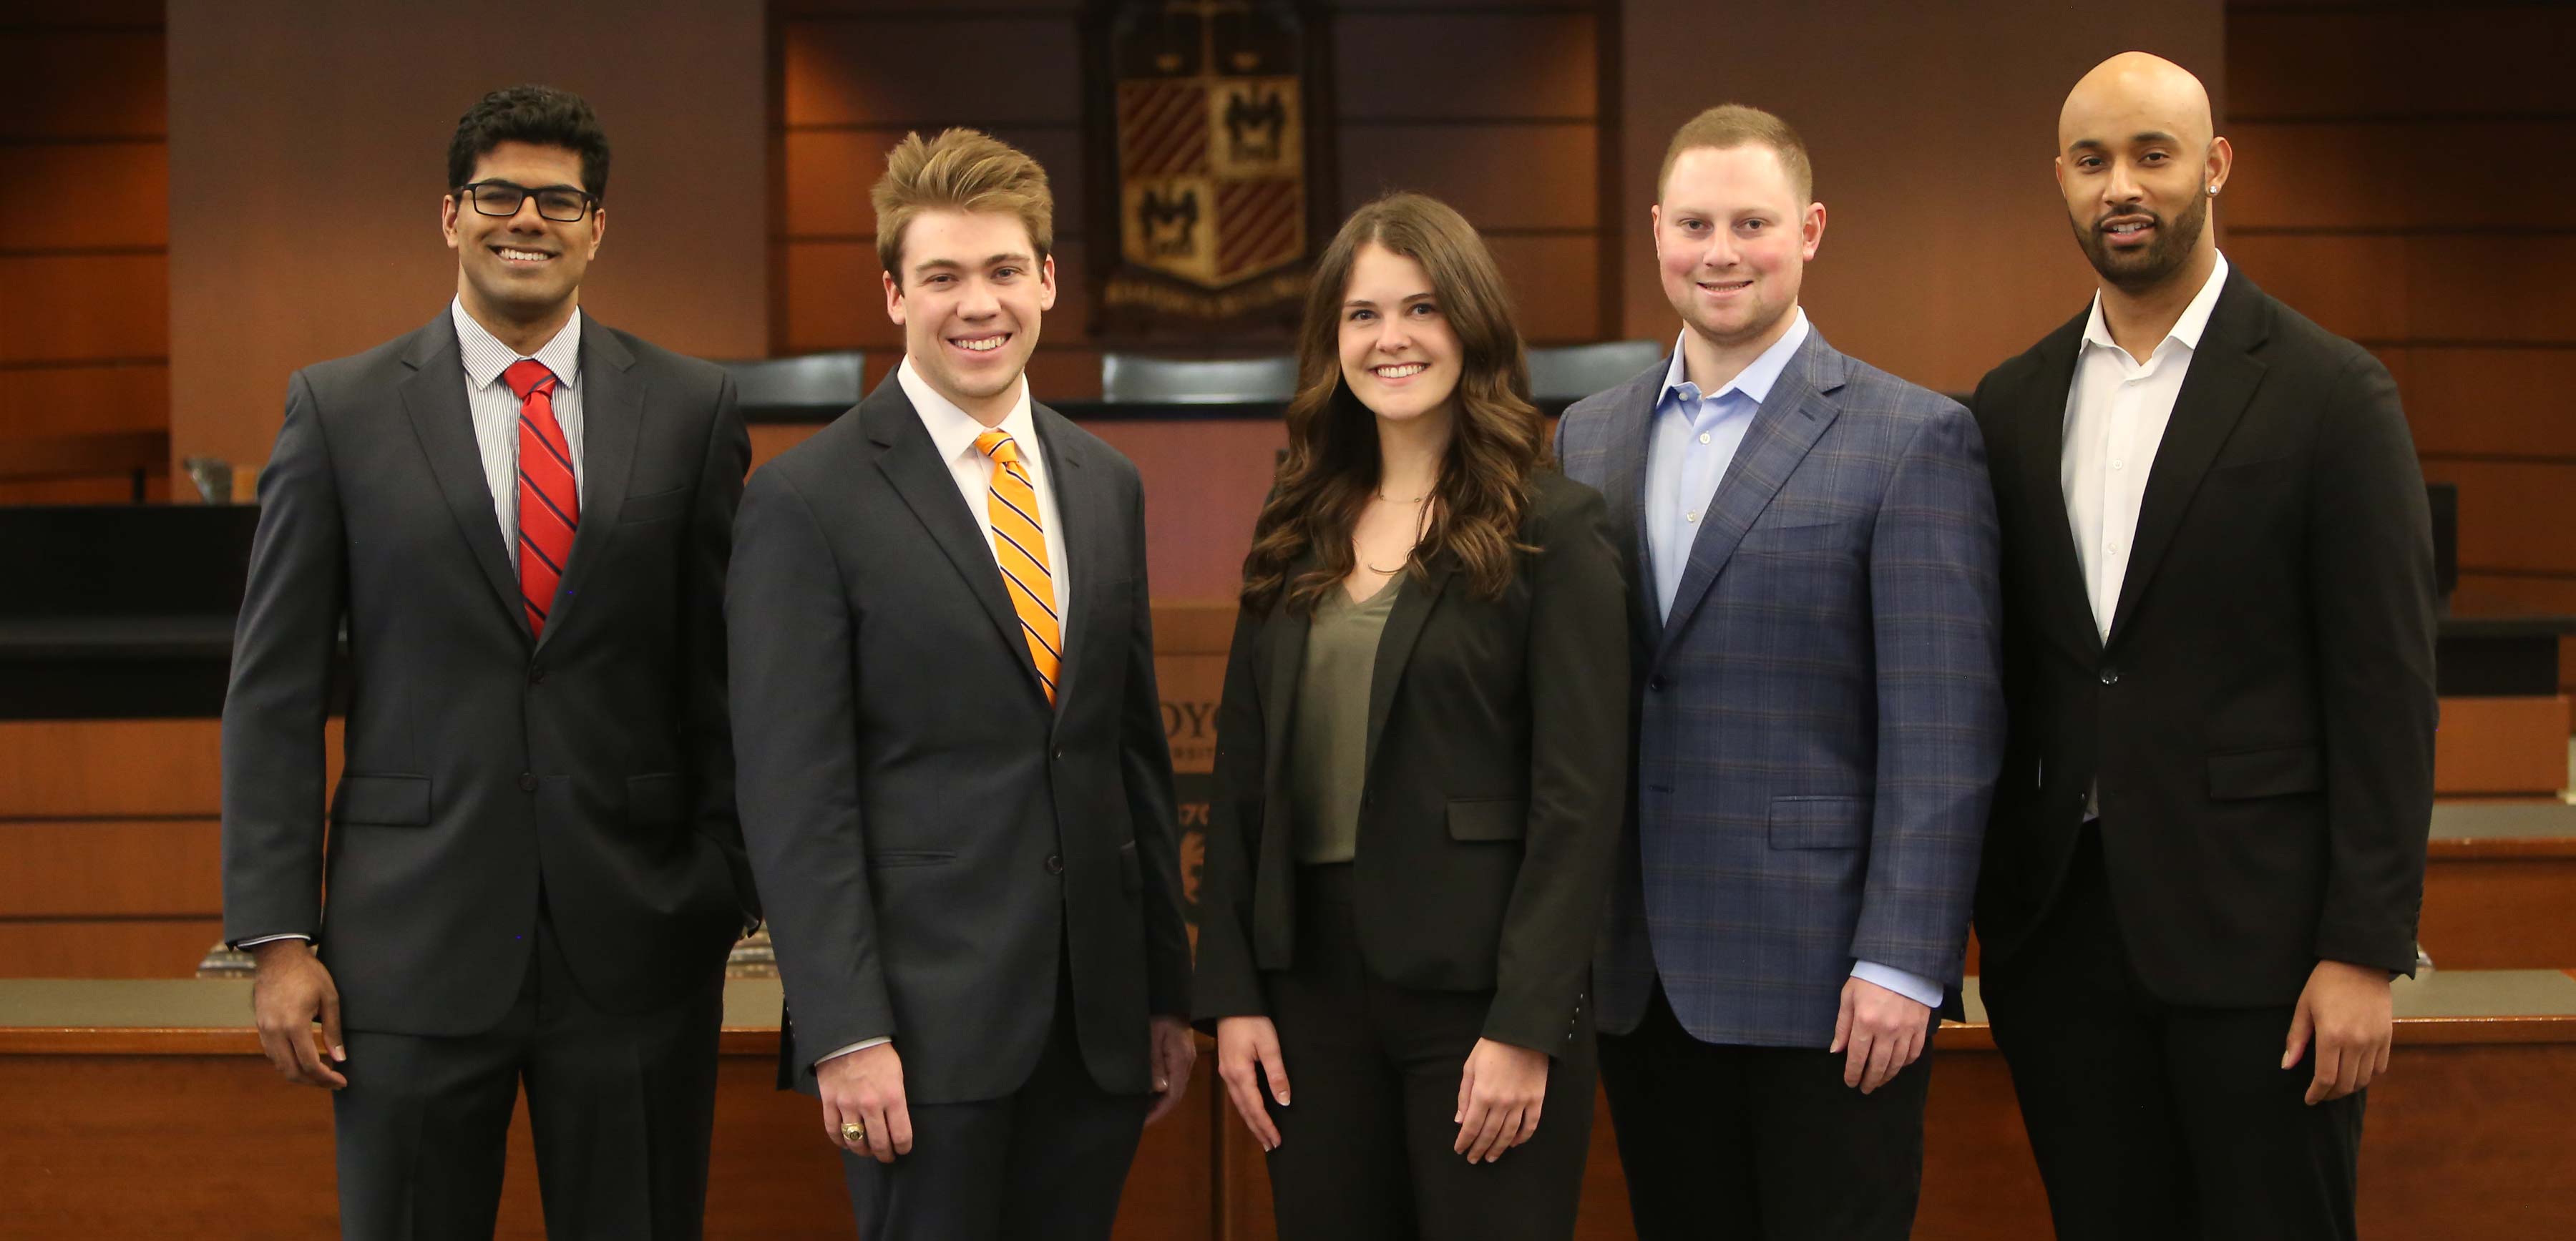 Sports Law Negotiation Competition Team